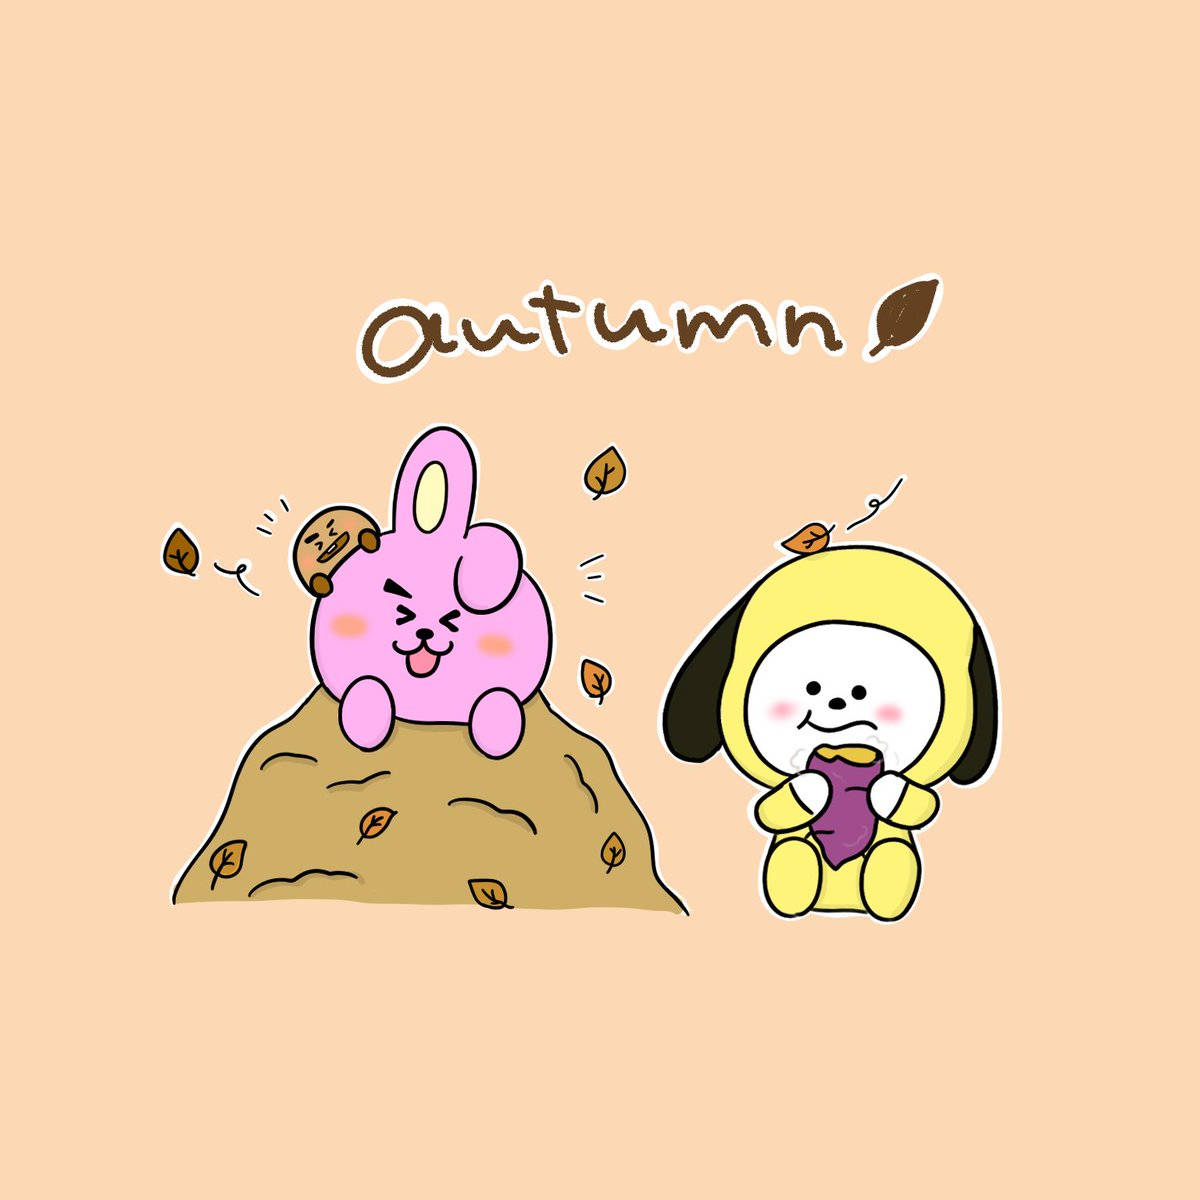 Cookyoch Chimmy Bt21 (note: This Is Already In English And Does Not Require Translation Into Swedish) Wallpaper